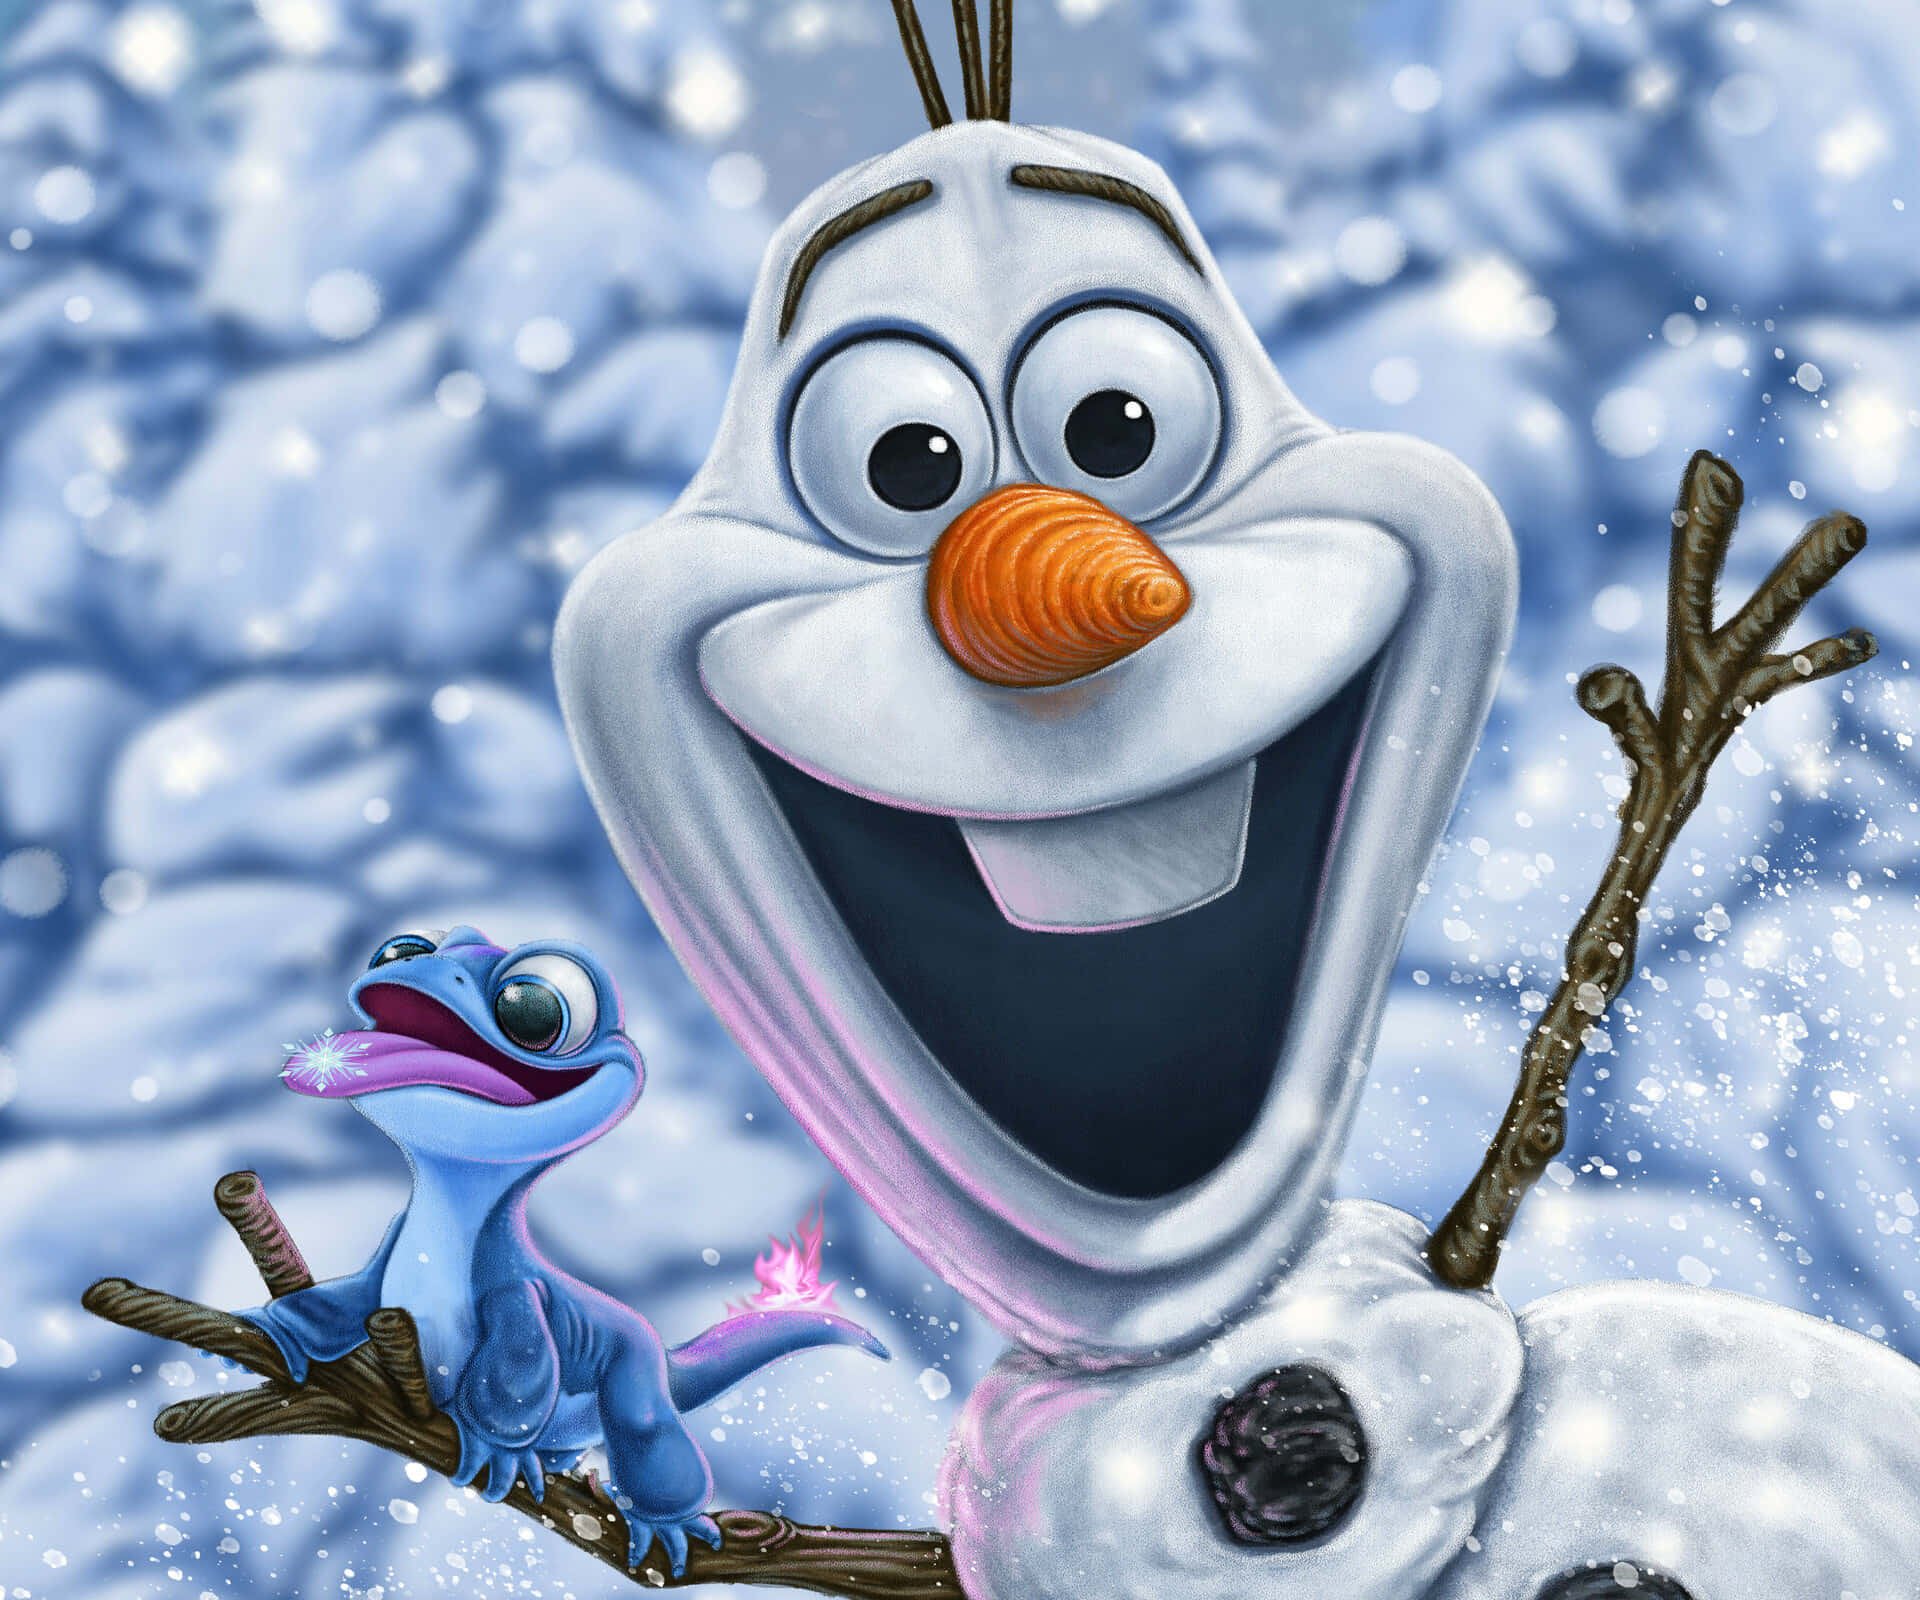 Every day is an adventure with Olaf!